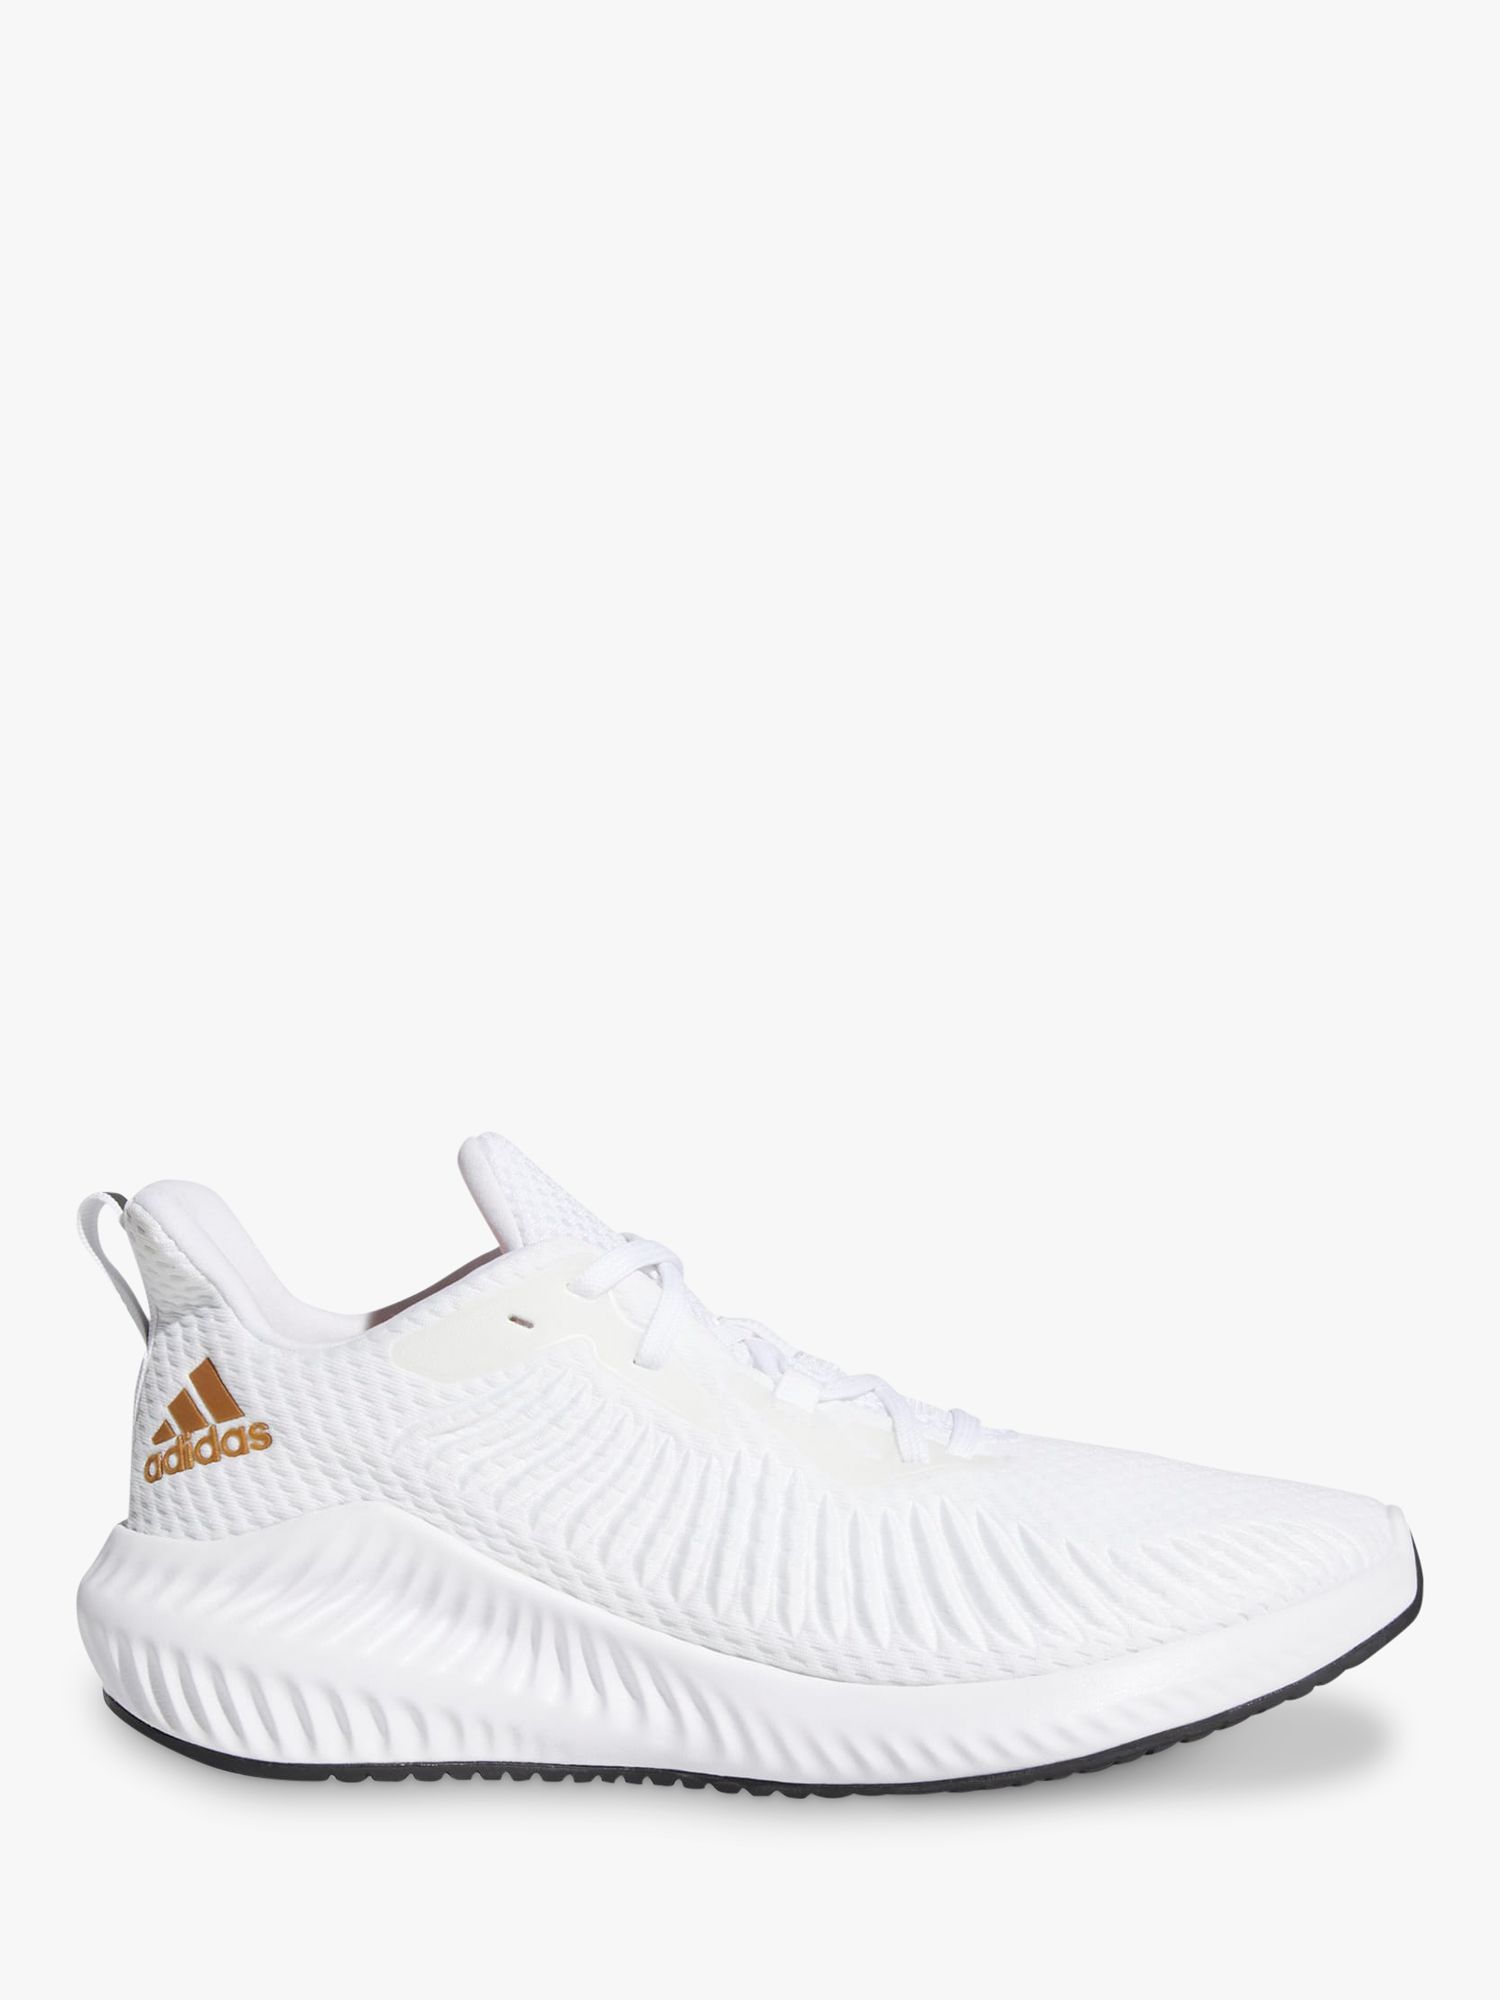 adidas AlphaBounce 3 Women's Cross Trainers, FTWR White/Copper Met ...